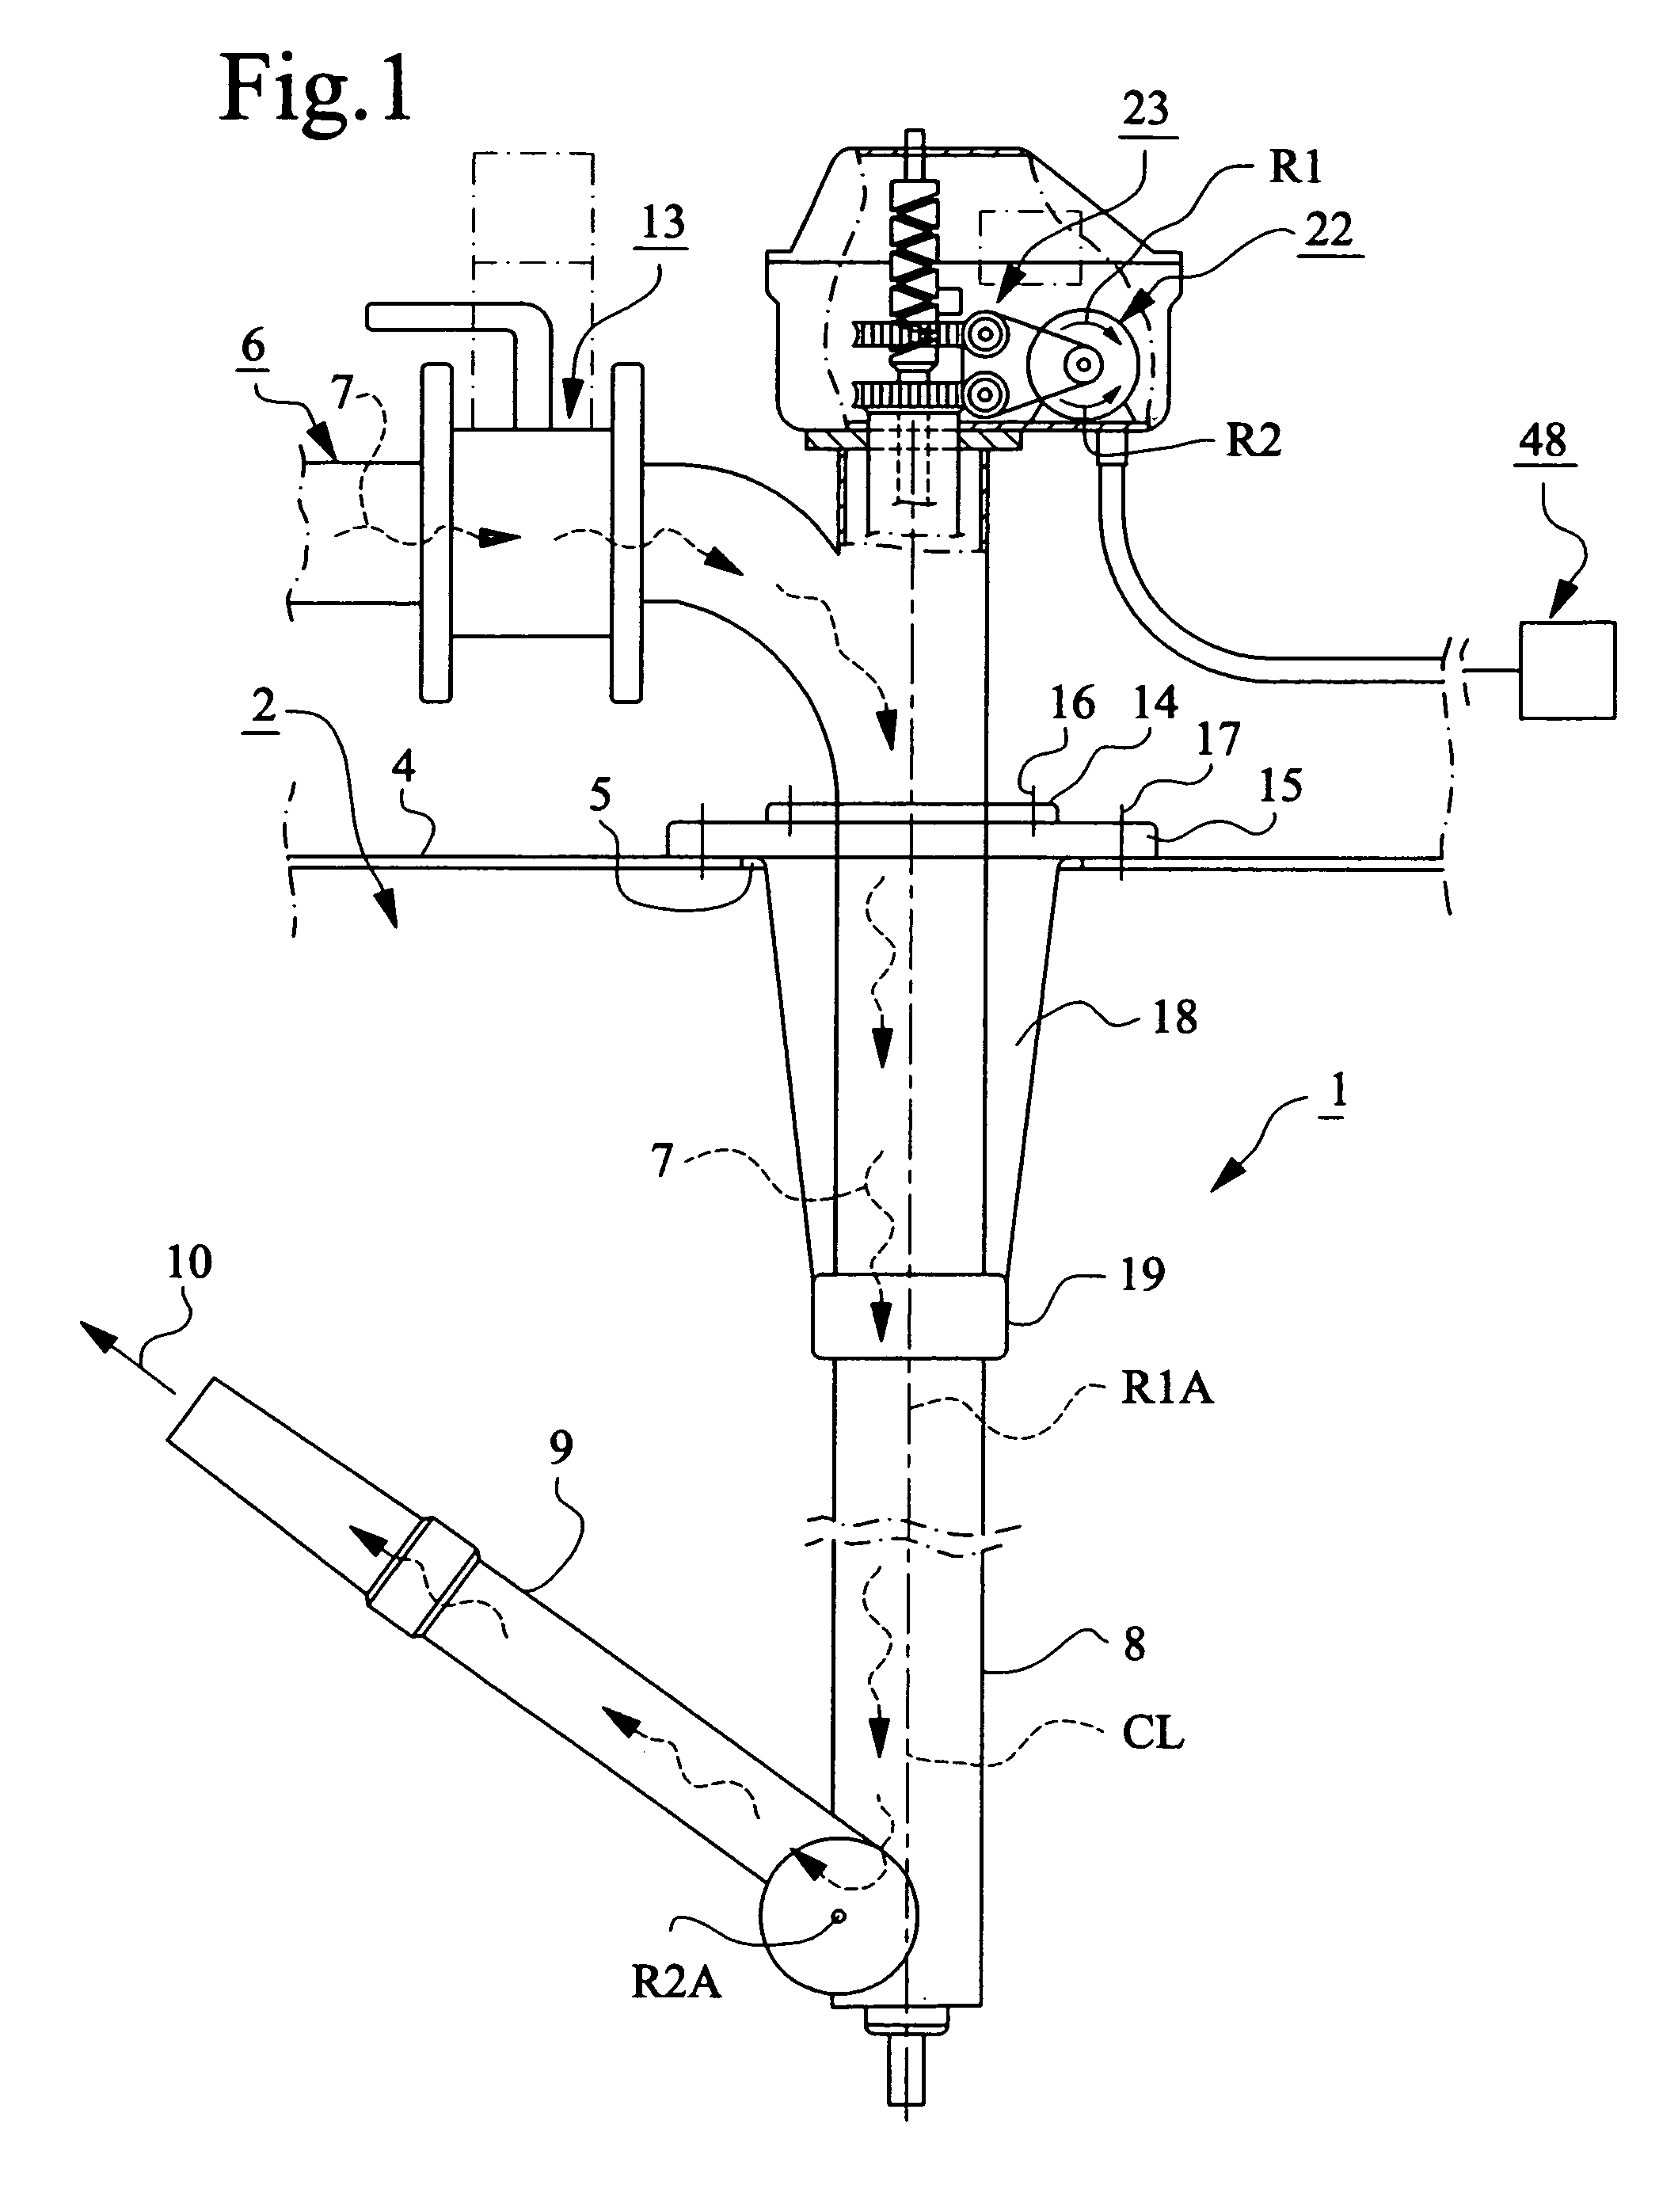 Device for interior flushing of tanks or containers